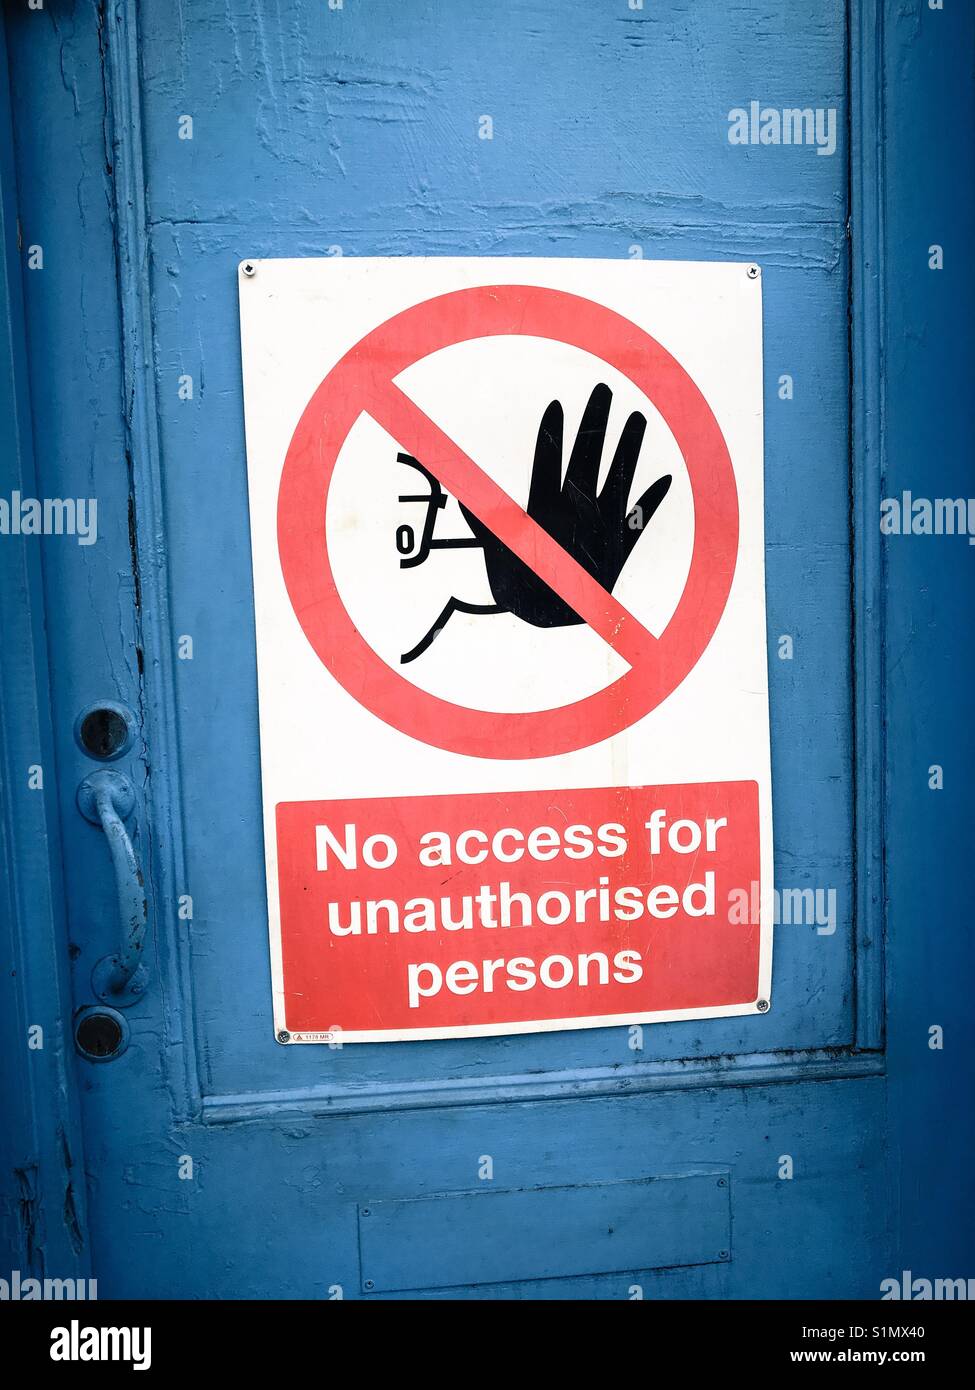 No access for unauthorised persons sign on blue door Stock Photo